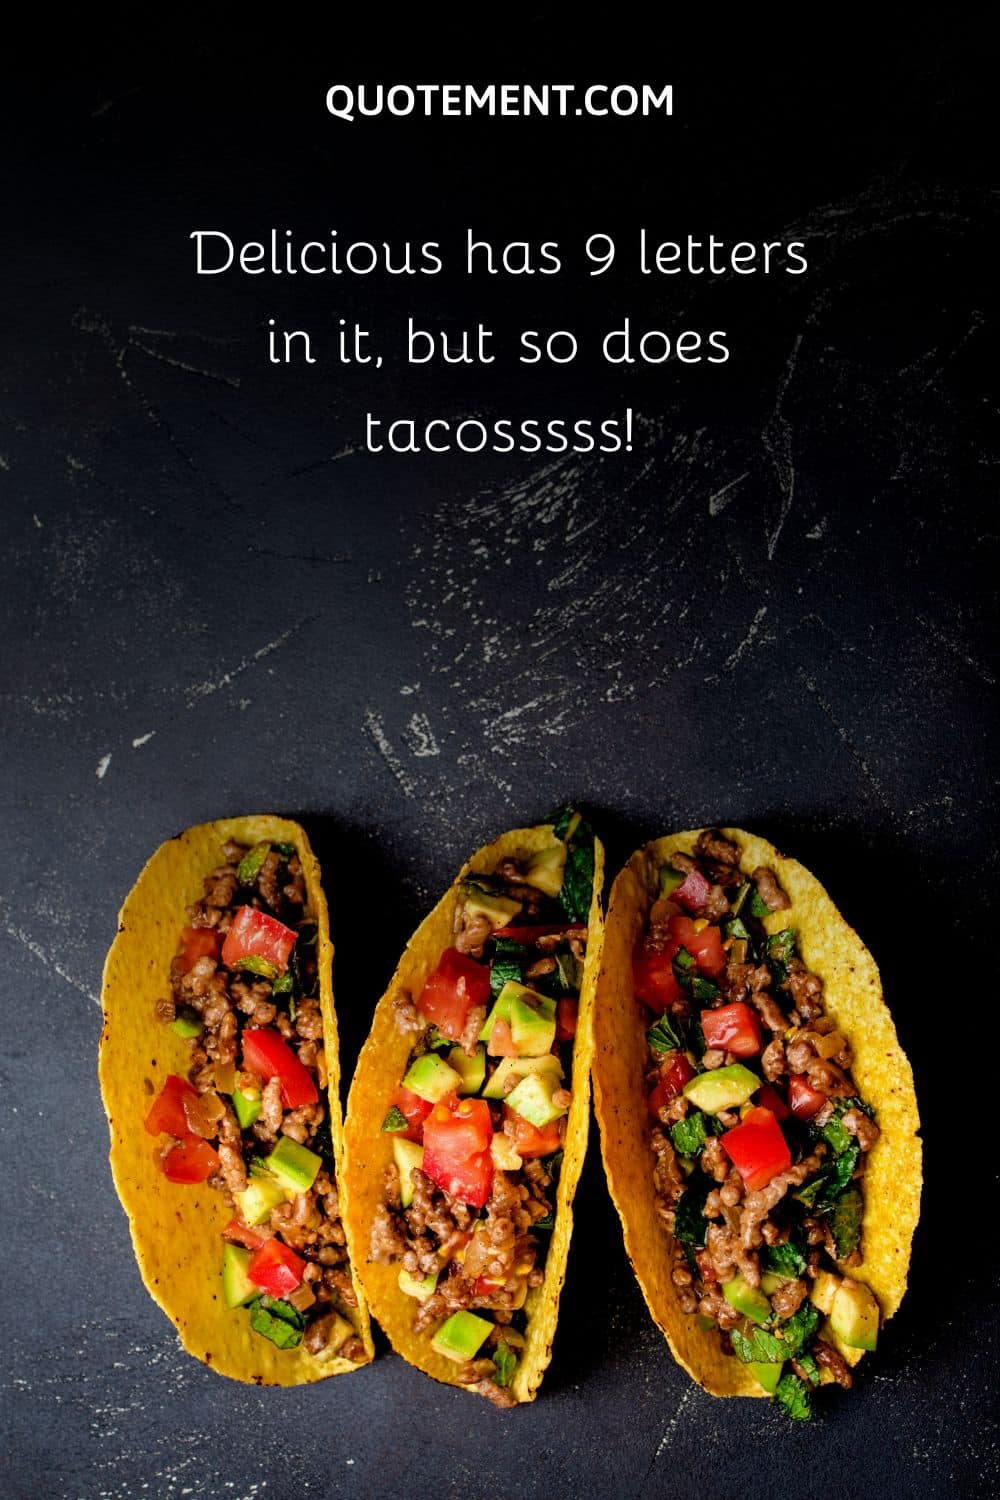 Delicious has 9 letters in it, but so does tacosssss